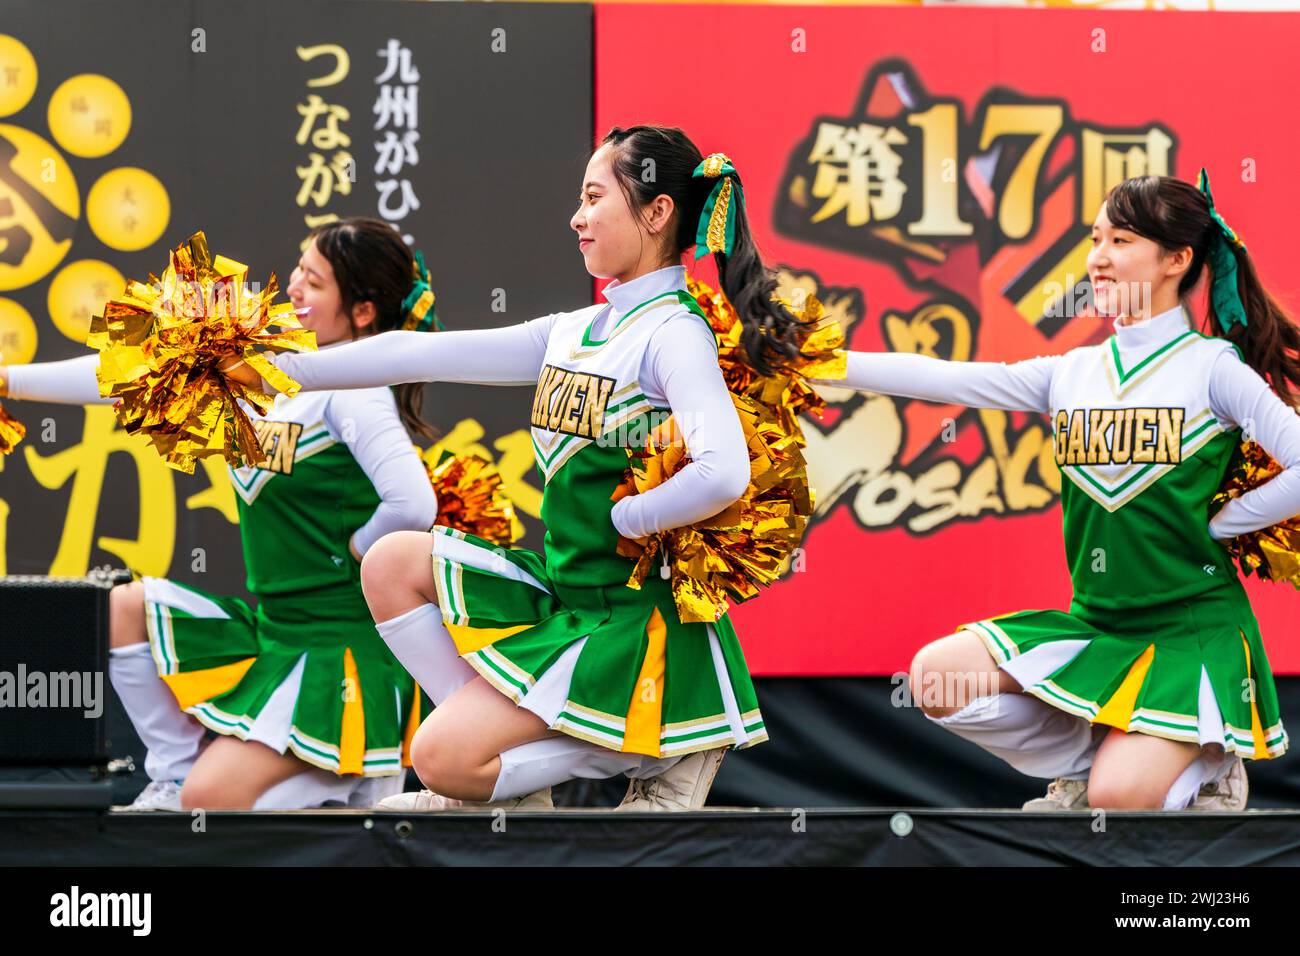 Japanese teenage women cheerleader Yosakoi dance team in green costumes dancing on stage holding gold glittery pom poms. All kneeling on stage. Stock Photo